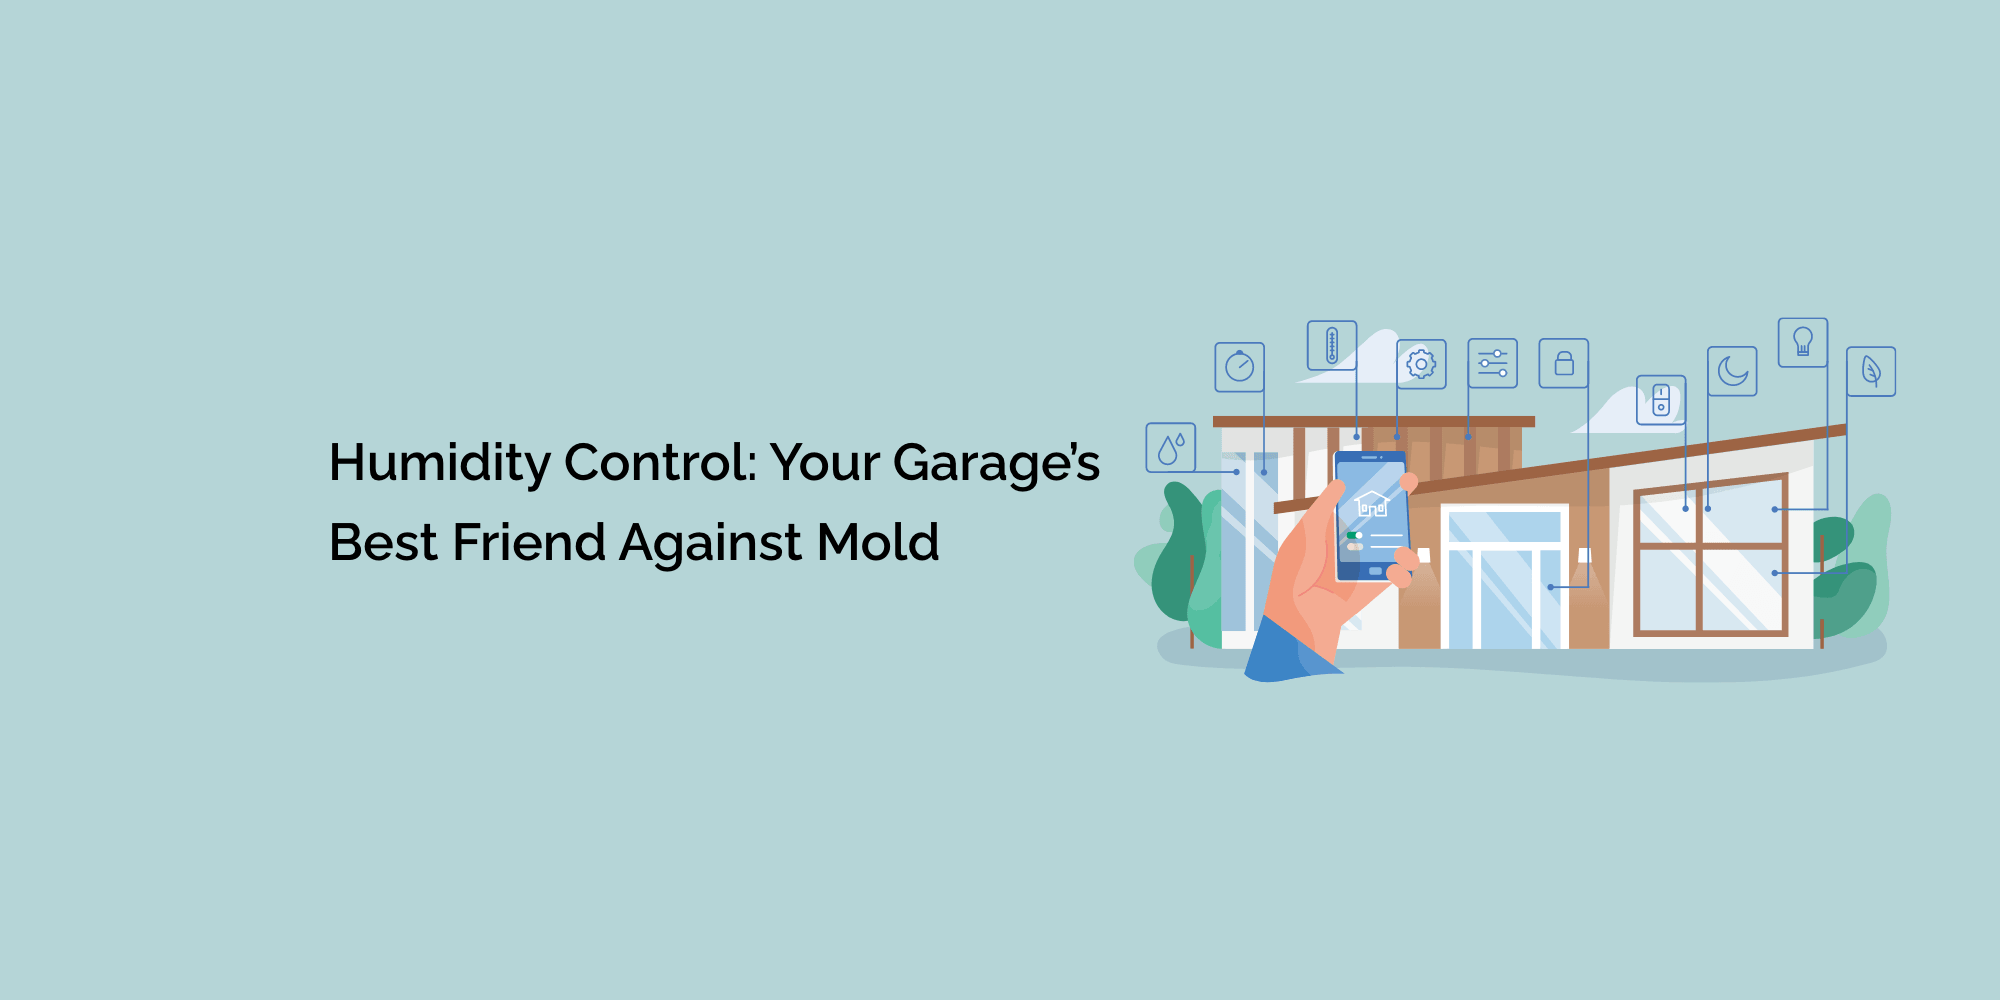 Humidity Control: Your Garage's Best Friend Against Mold